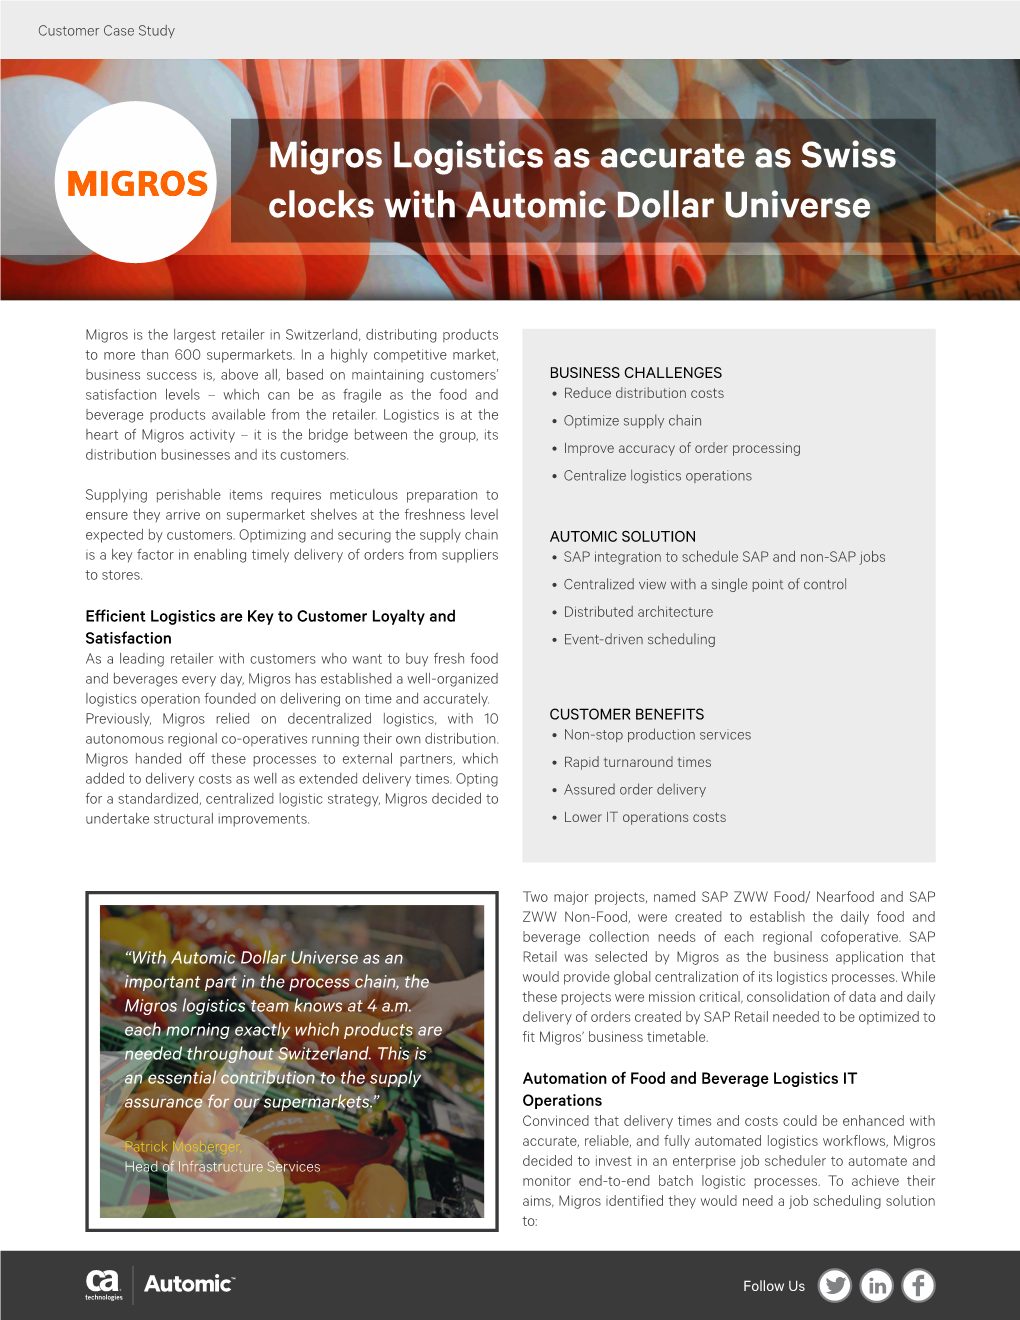 Migros Logistics As Accurate As Swiss Clocks with Automic Dollar Universe